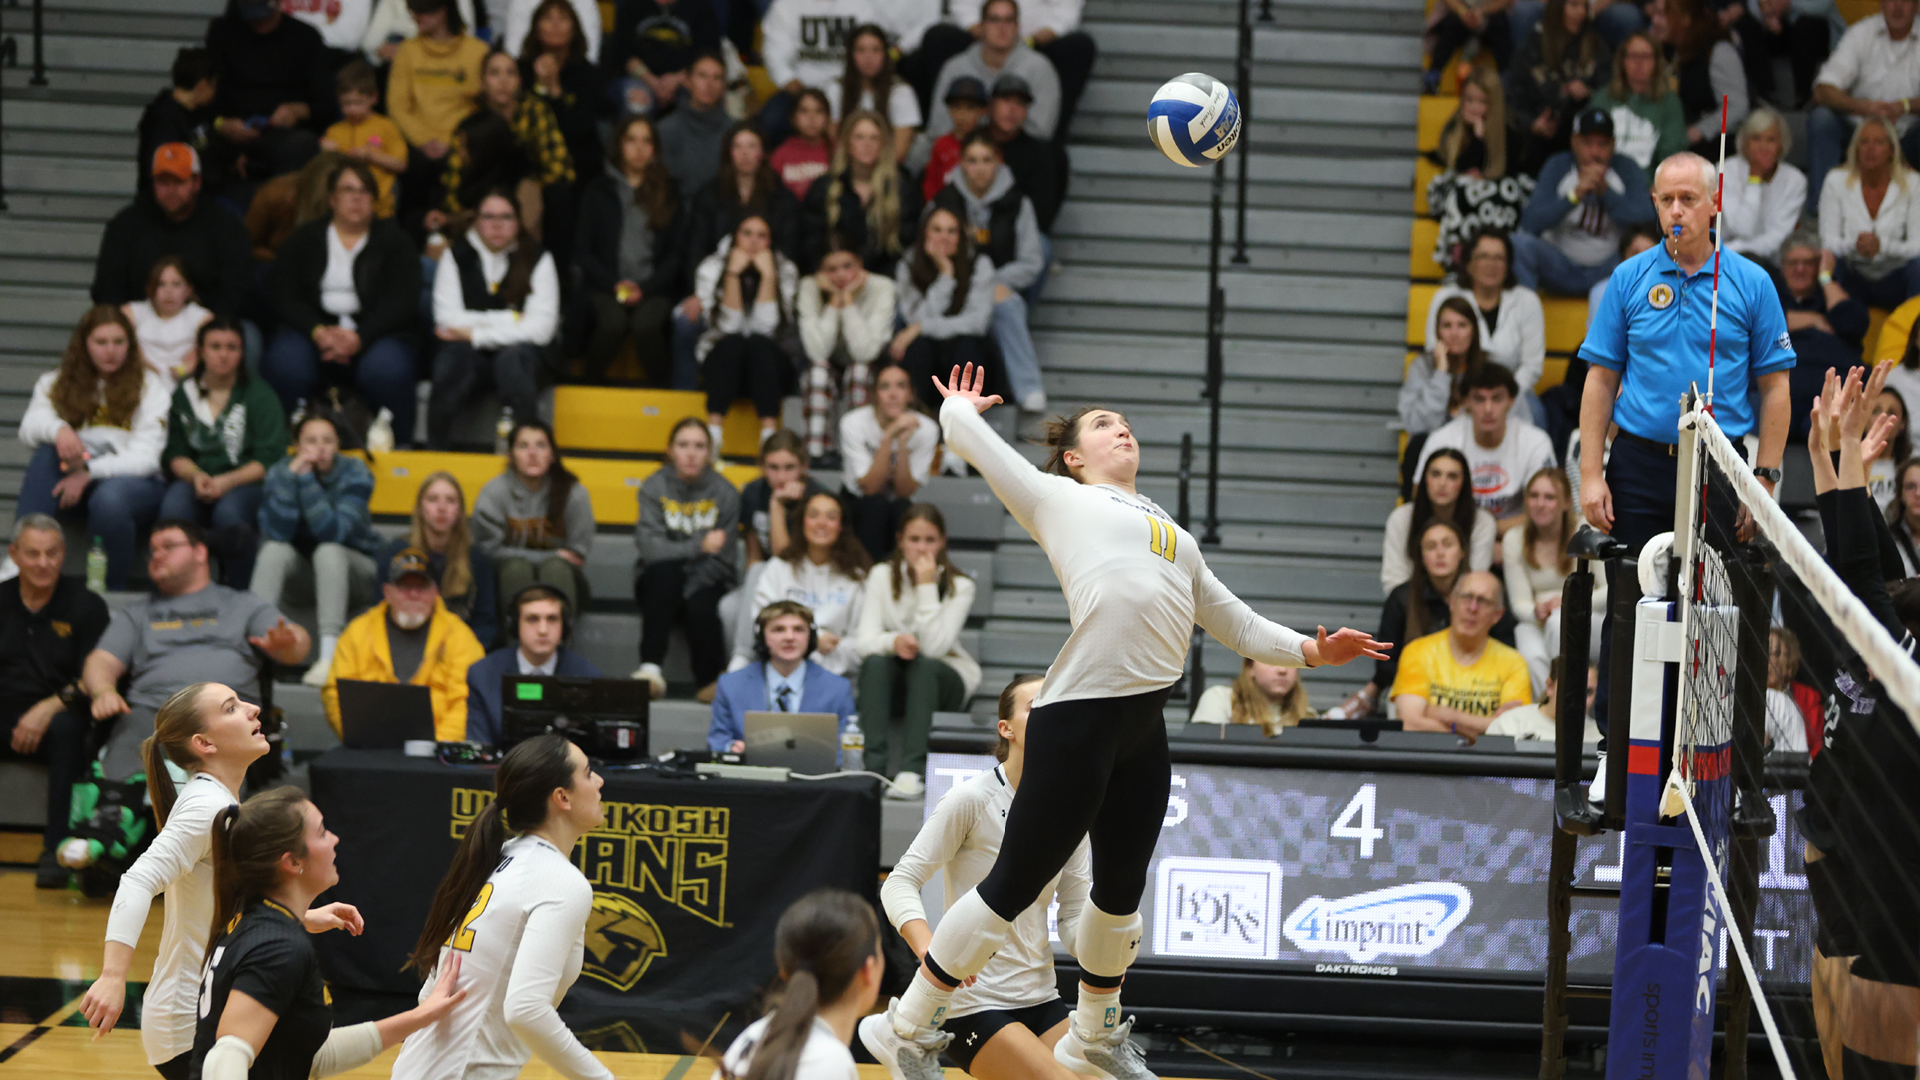 Riley Kindt hit 10 kills in the Titans' WIAC title match loss to UW-Whitewater